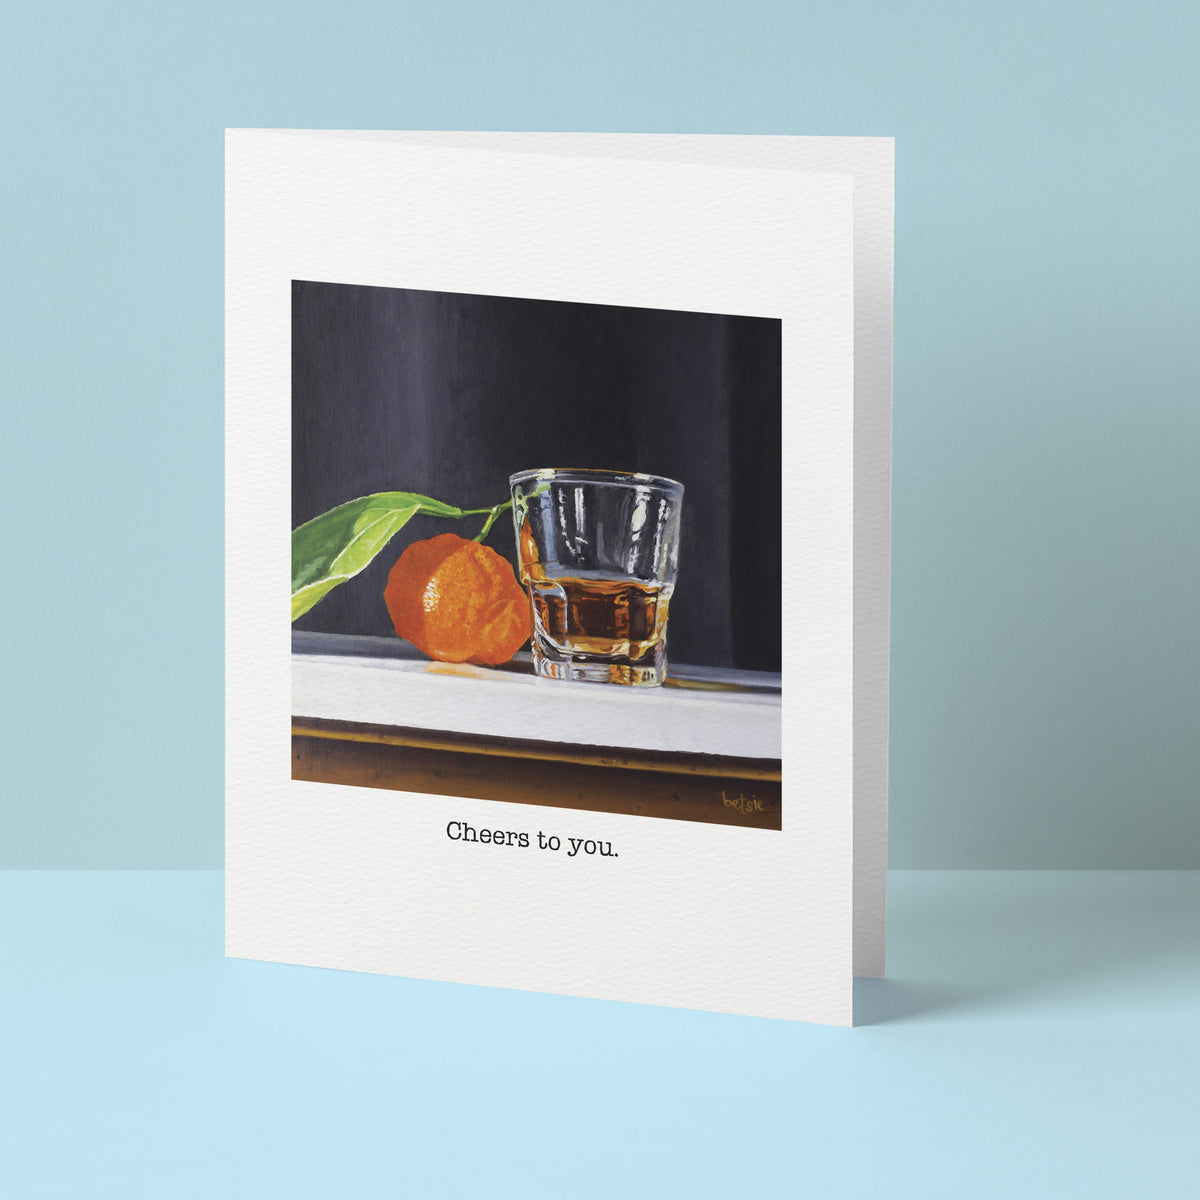 "Cheers to you" Greeting Card